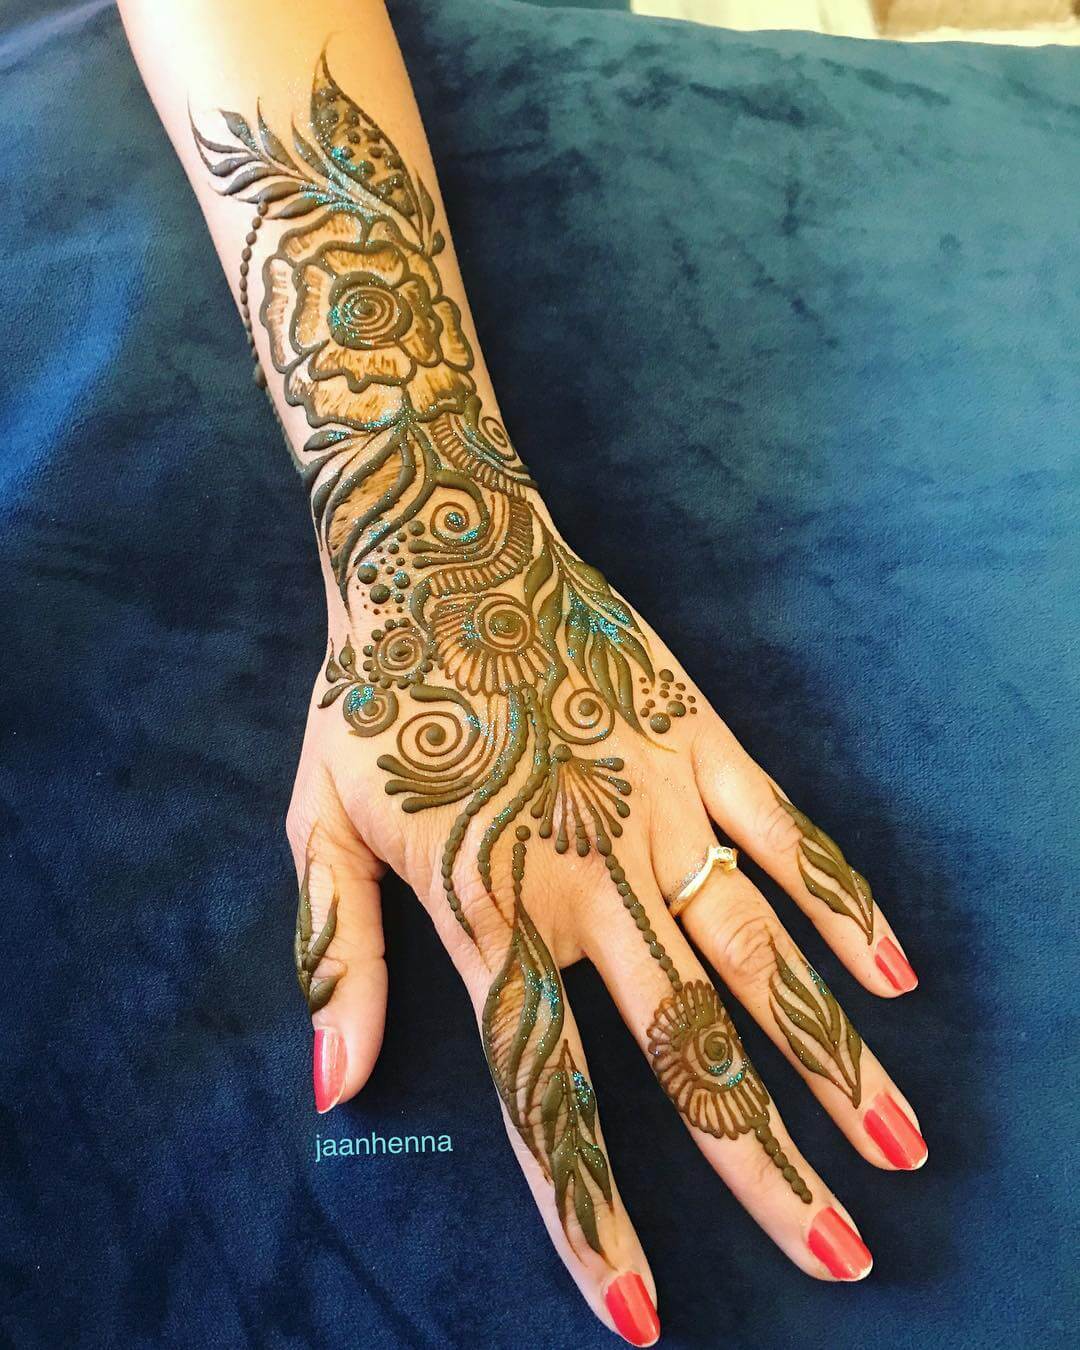 The Glitzy Radiance Shaded Mehndi Designs for Left Hand